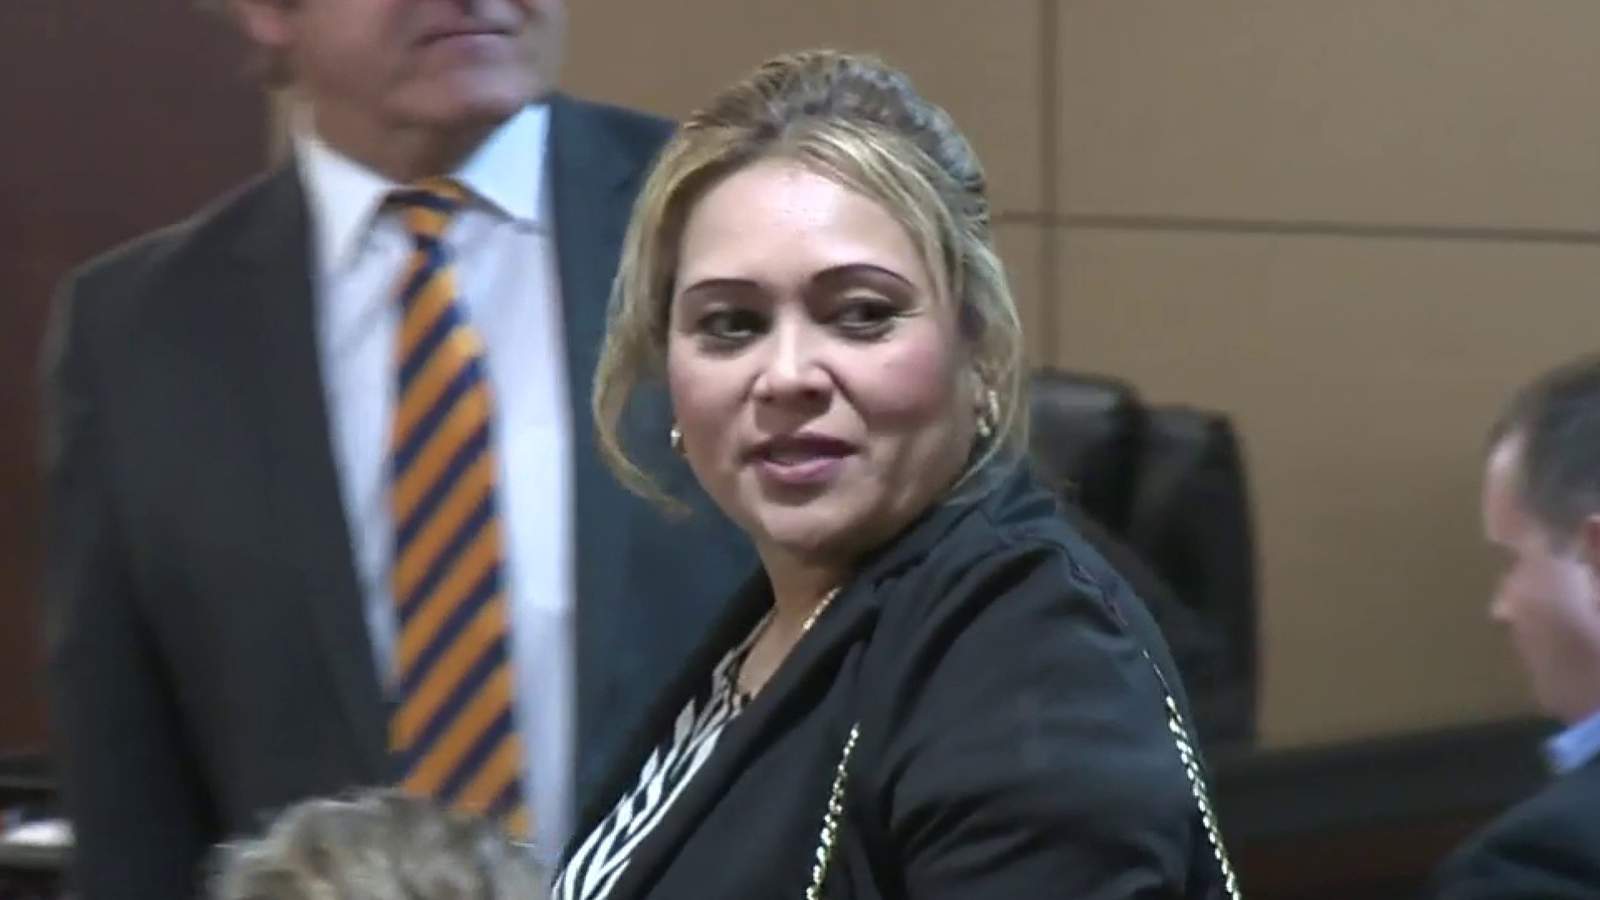 Barrientes Vela makes first court appearance since being indicted on felony charges